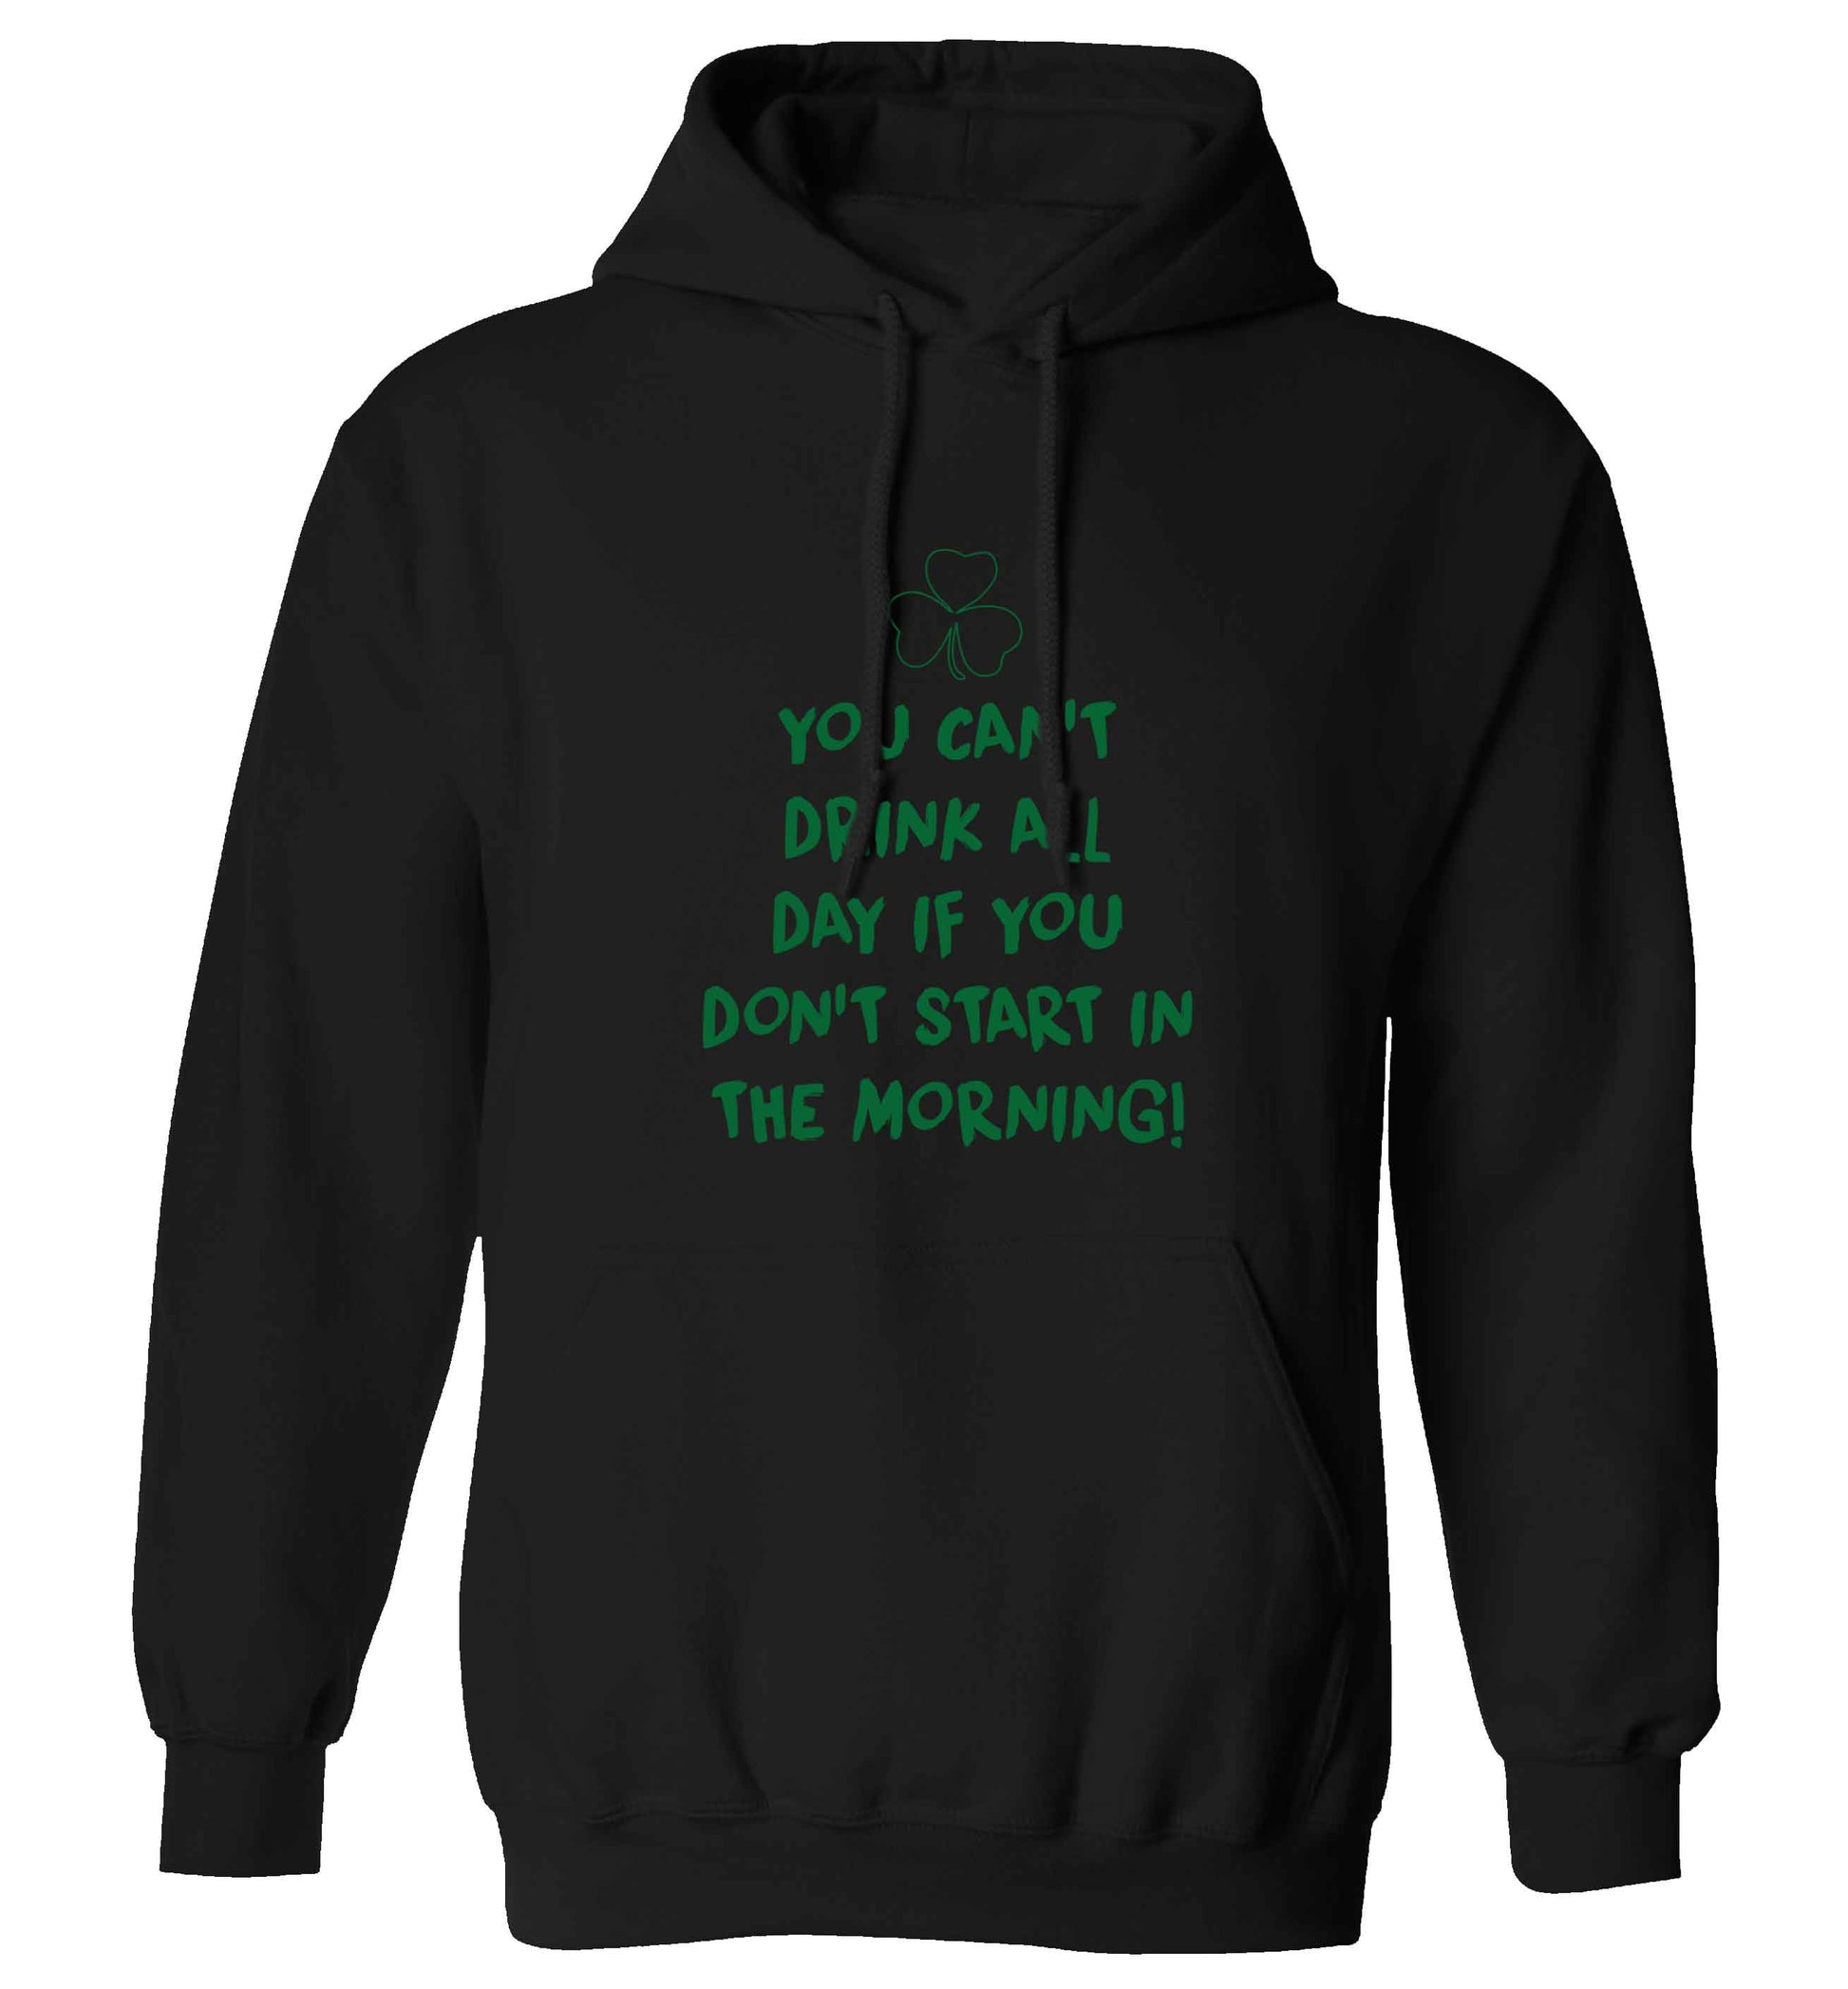 You can't drink all day if you don't start in the morning adults unisex black hoodie 2XL